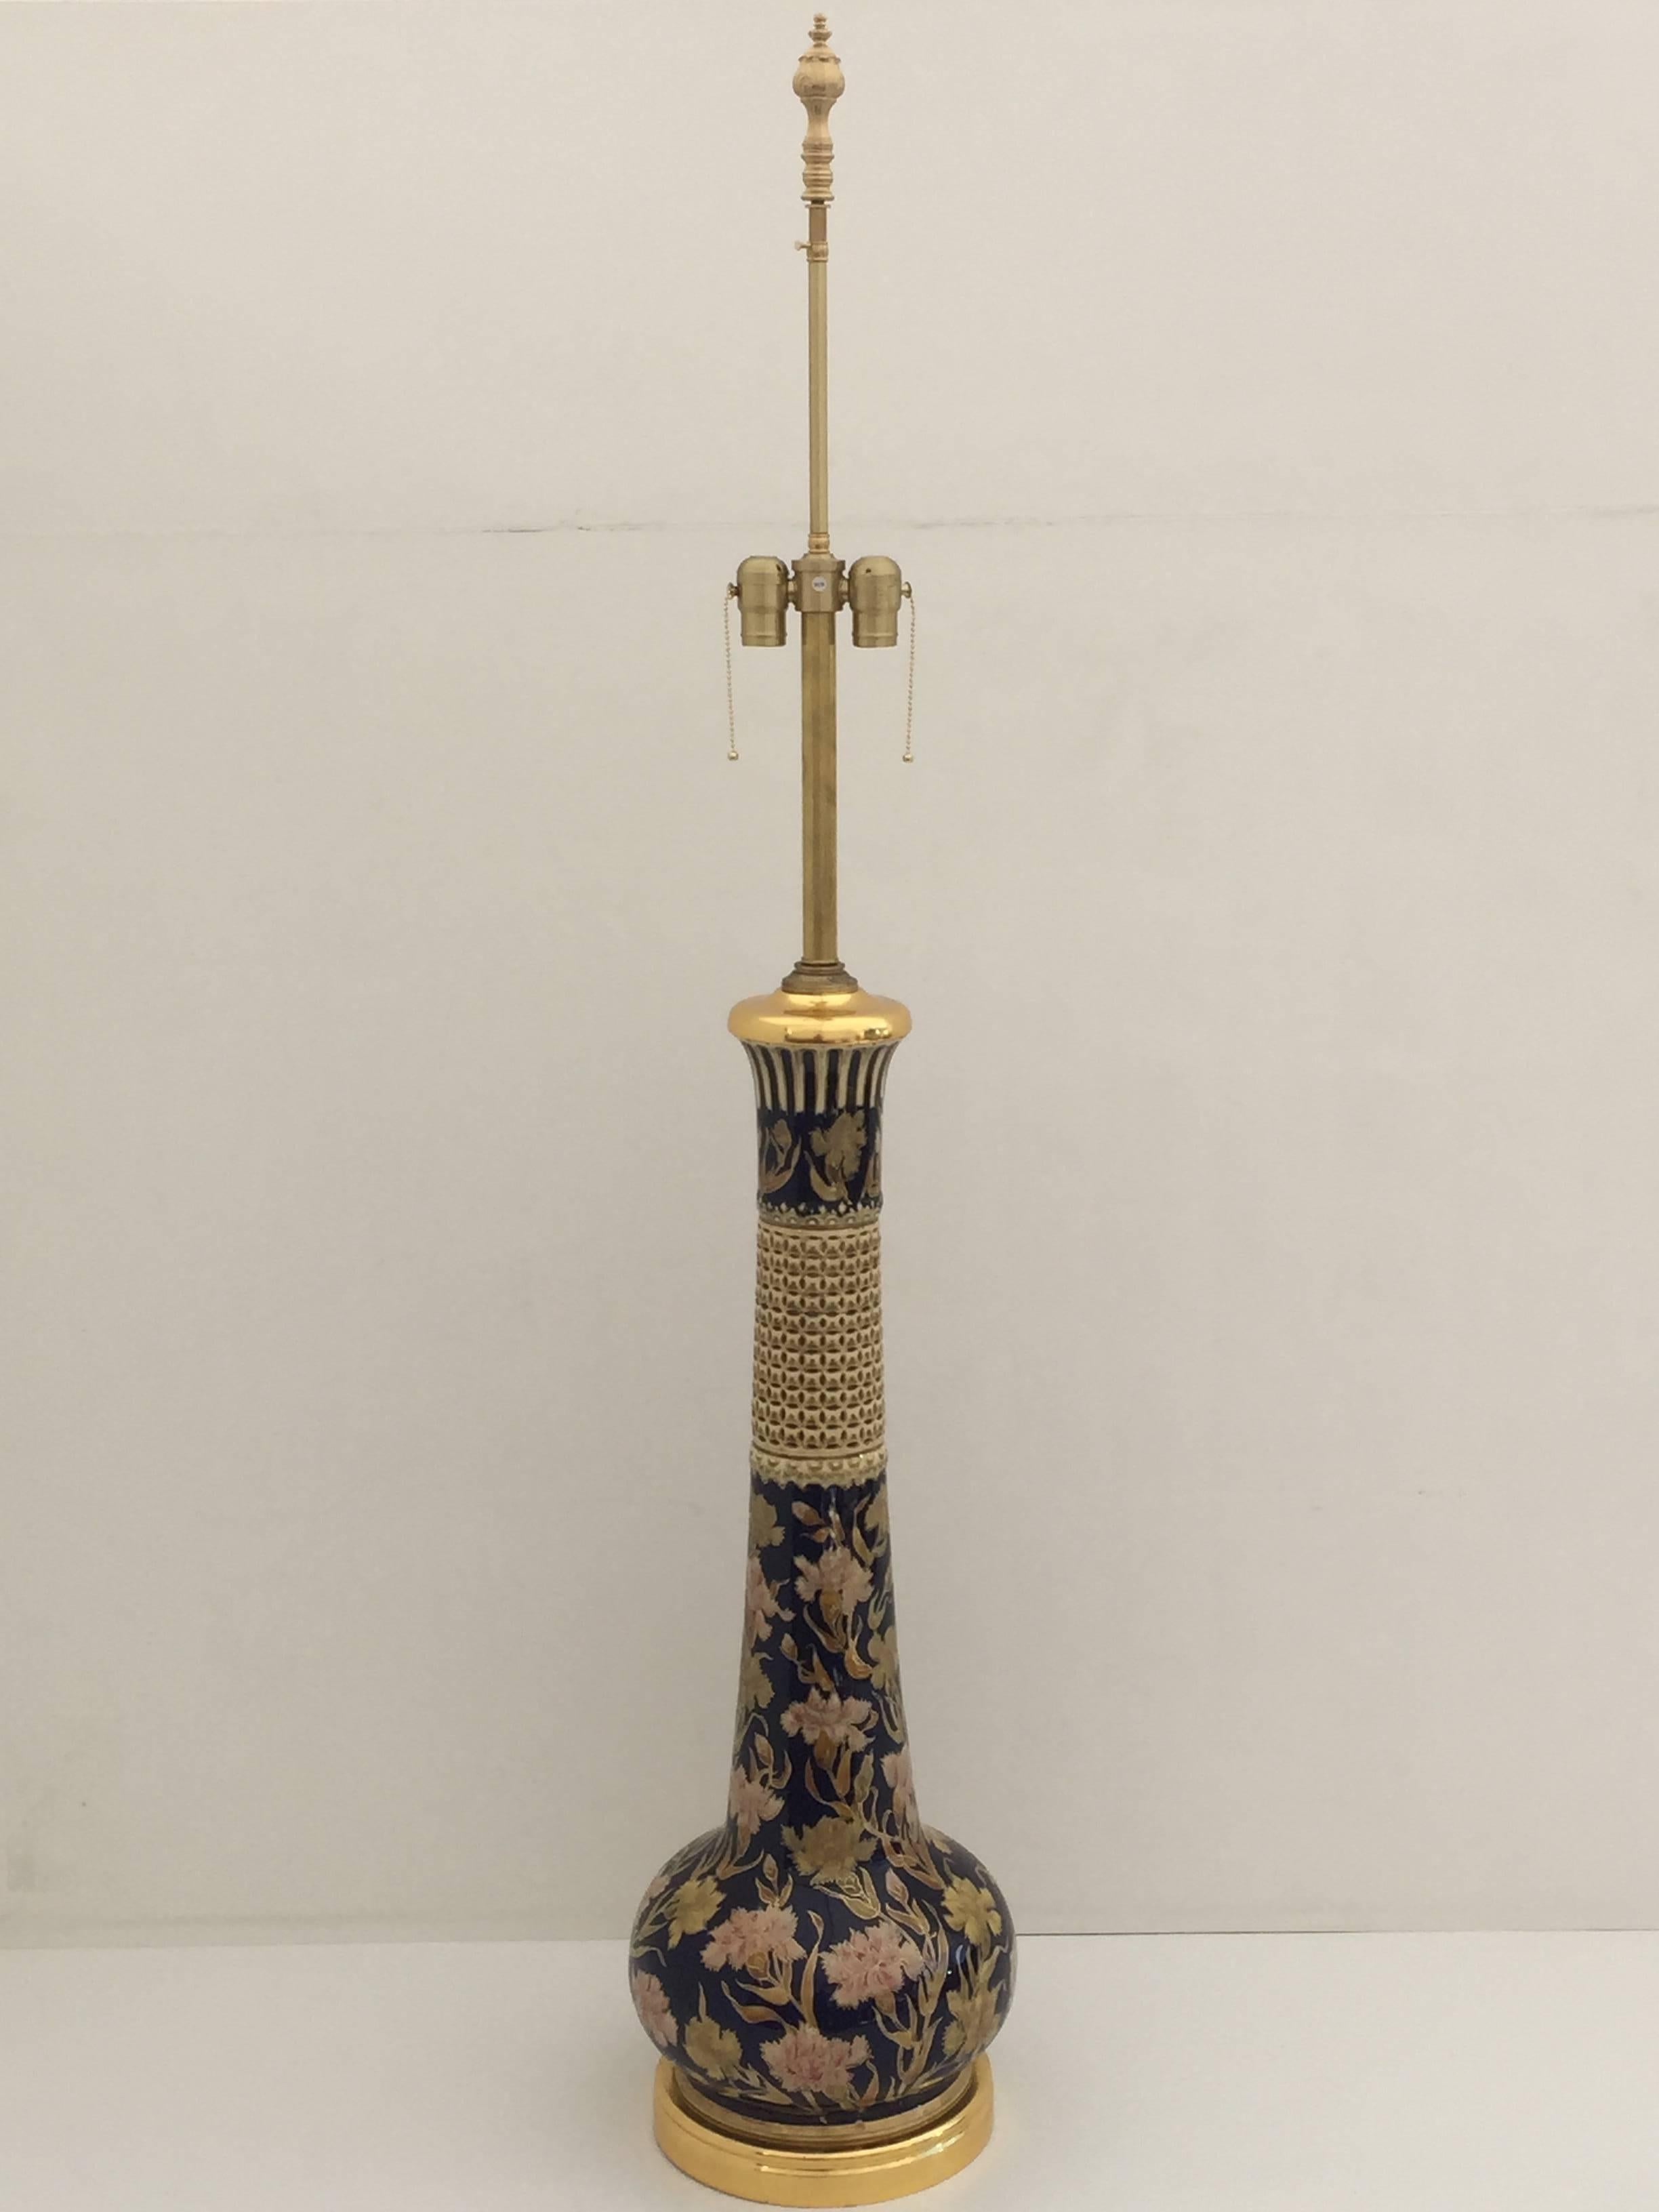 Giant ceramic and 24-karat gold leaf lamp with Islamic floral design.
Just ceramic part itself is 32" tall.